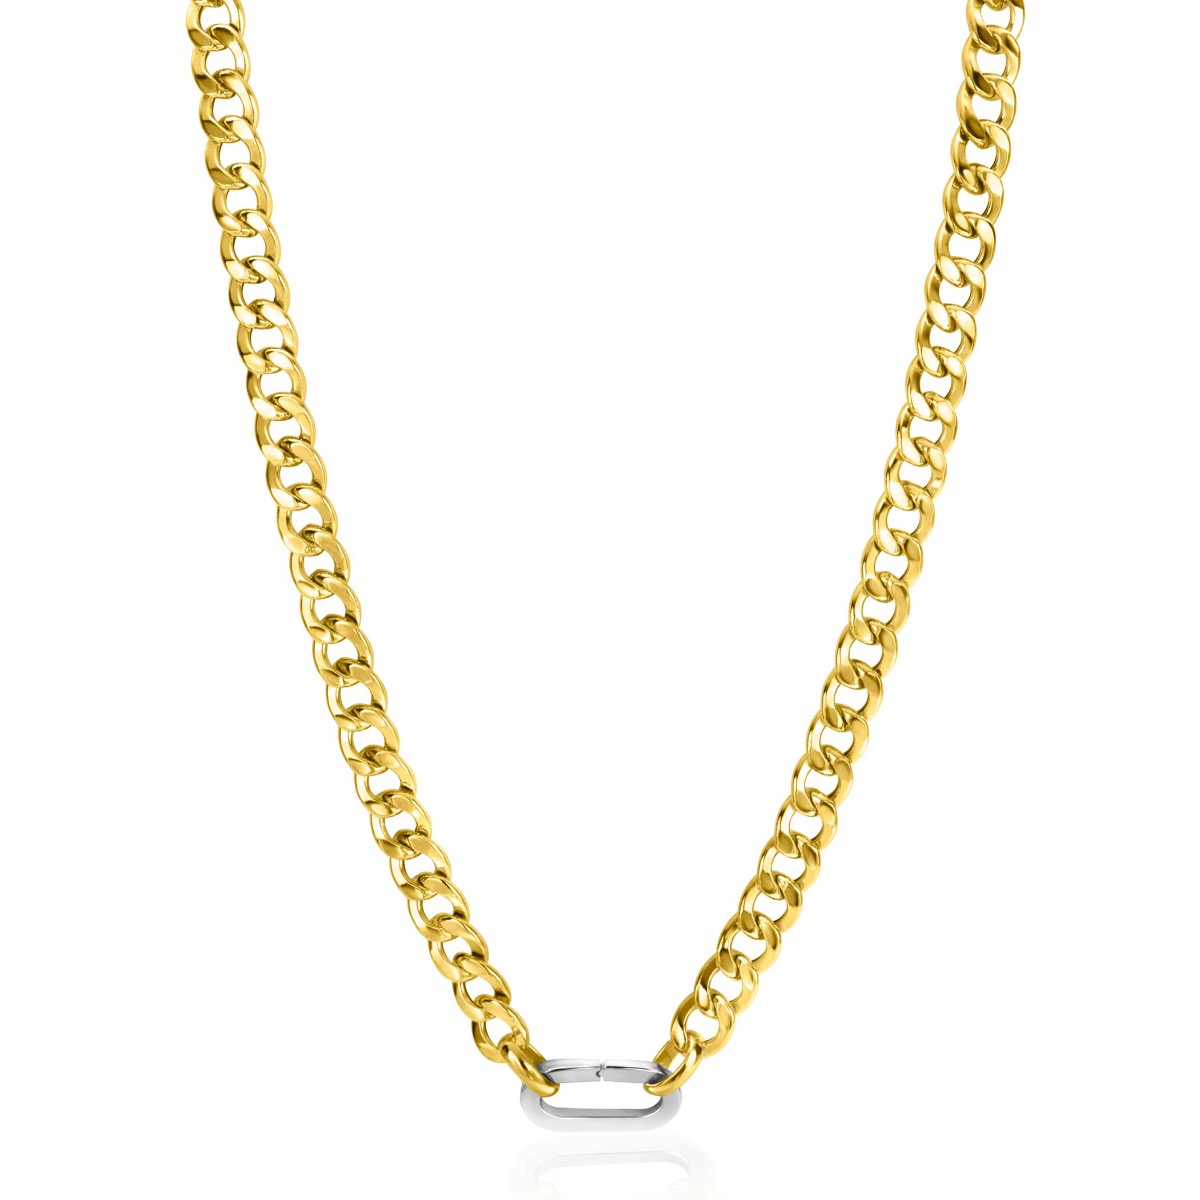 ZINZI Gold Plated Sterling Silver Curb Chain Statement Necklace 42cm with Silver Oval Clasp ZIC2378G